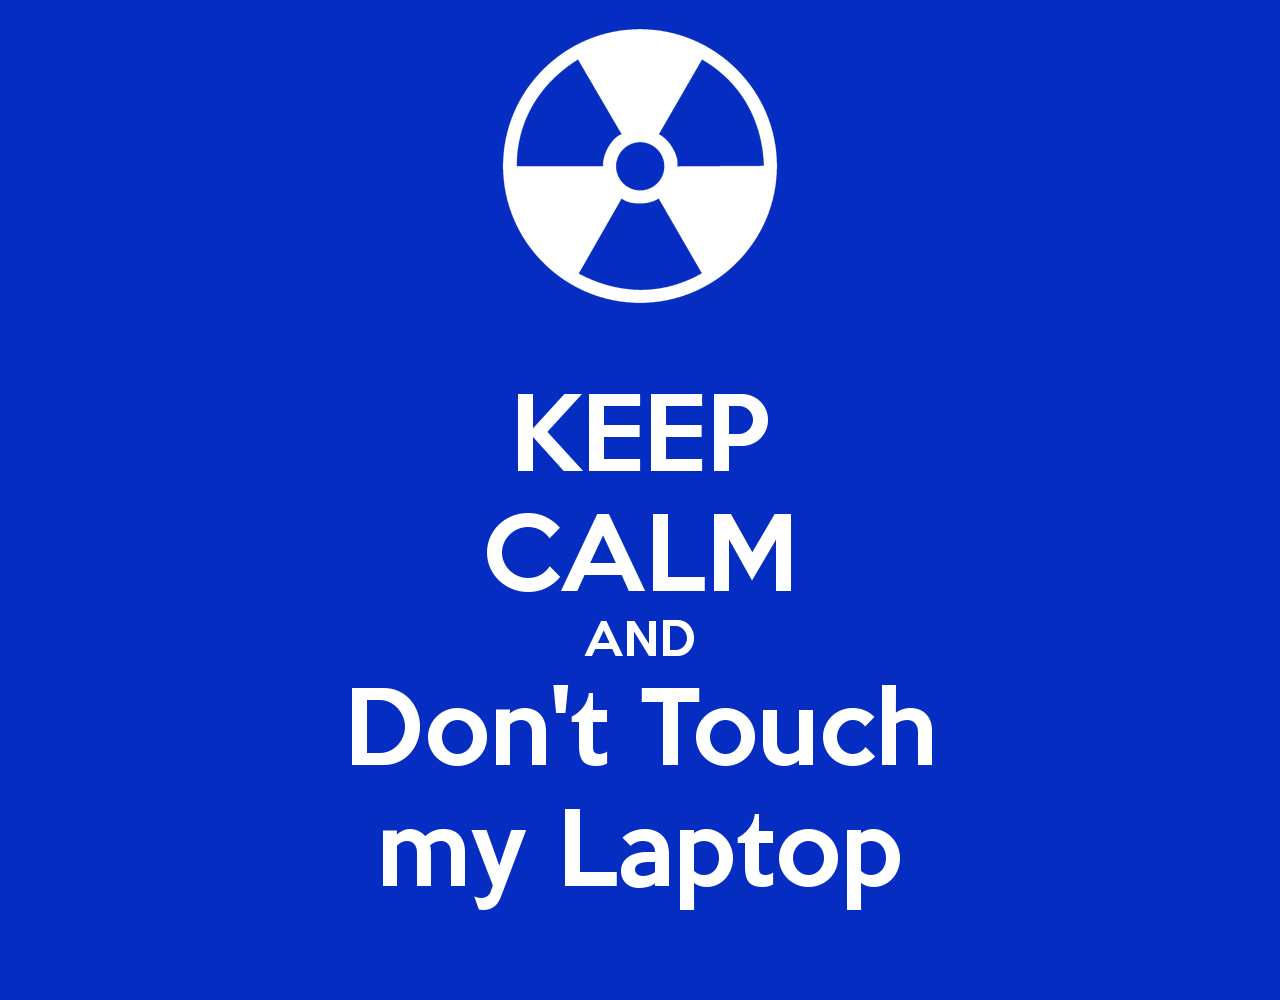 Touch песня speed up. Don't Touch my Laptop обои. Обои keep Calm and don't Touch my Computer. Don't Touch my Computer. Don't Touch my Notebook.